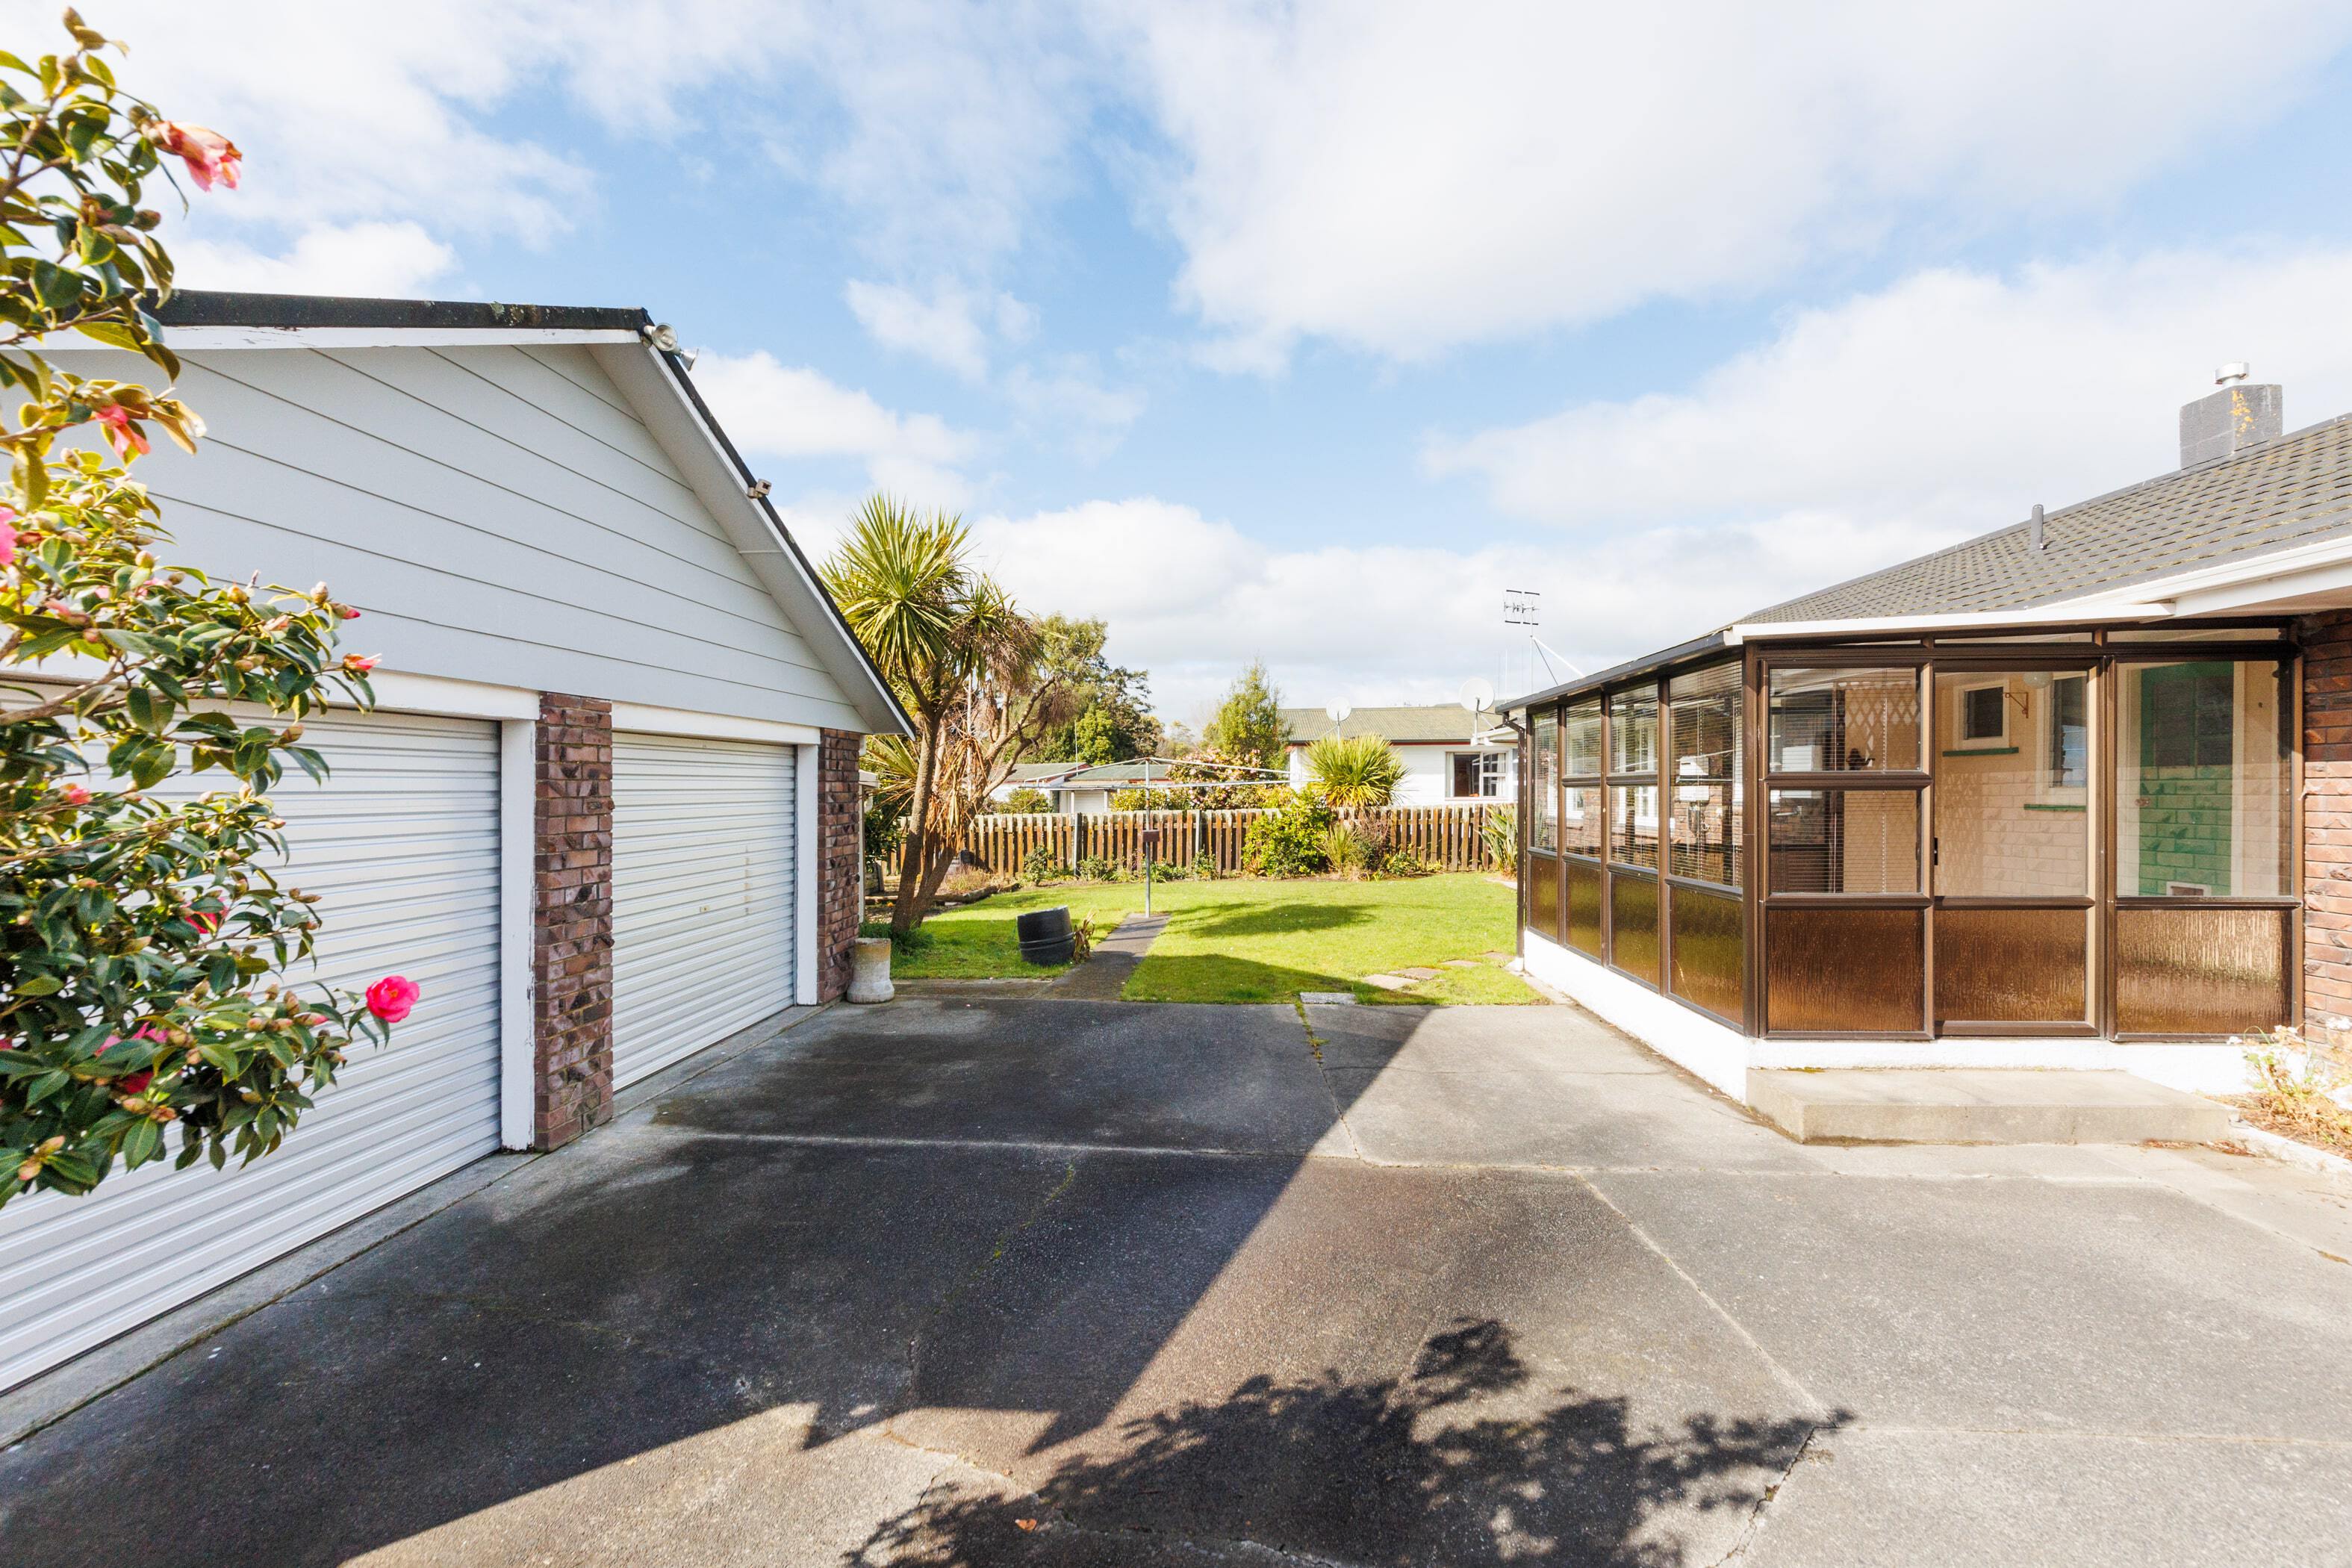 Property Picture: The perfect starter in Feilding